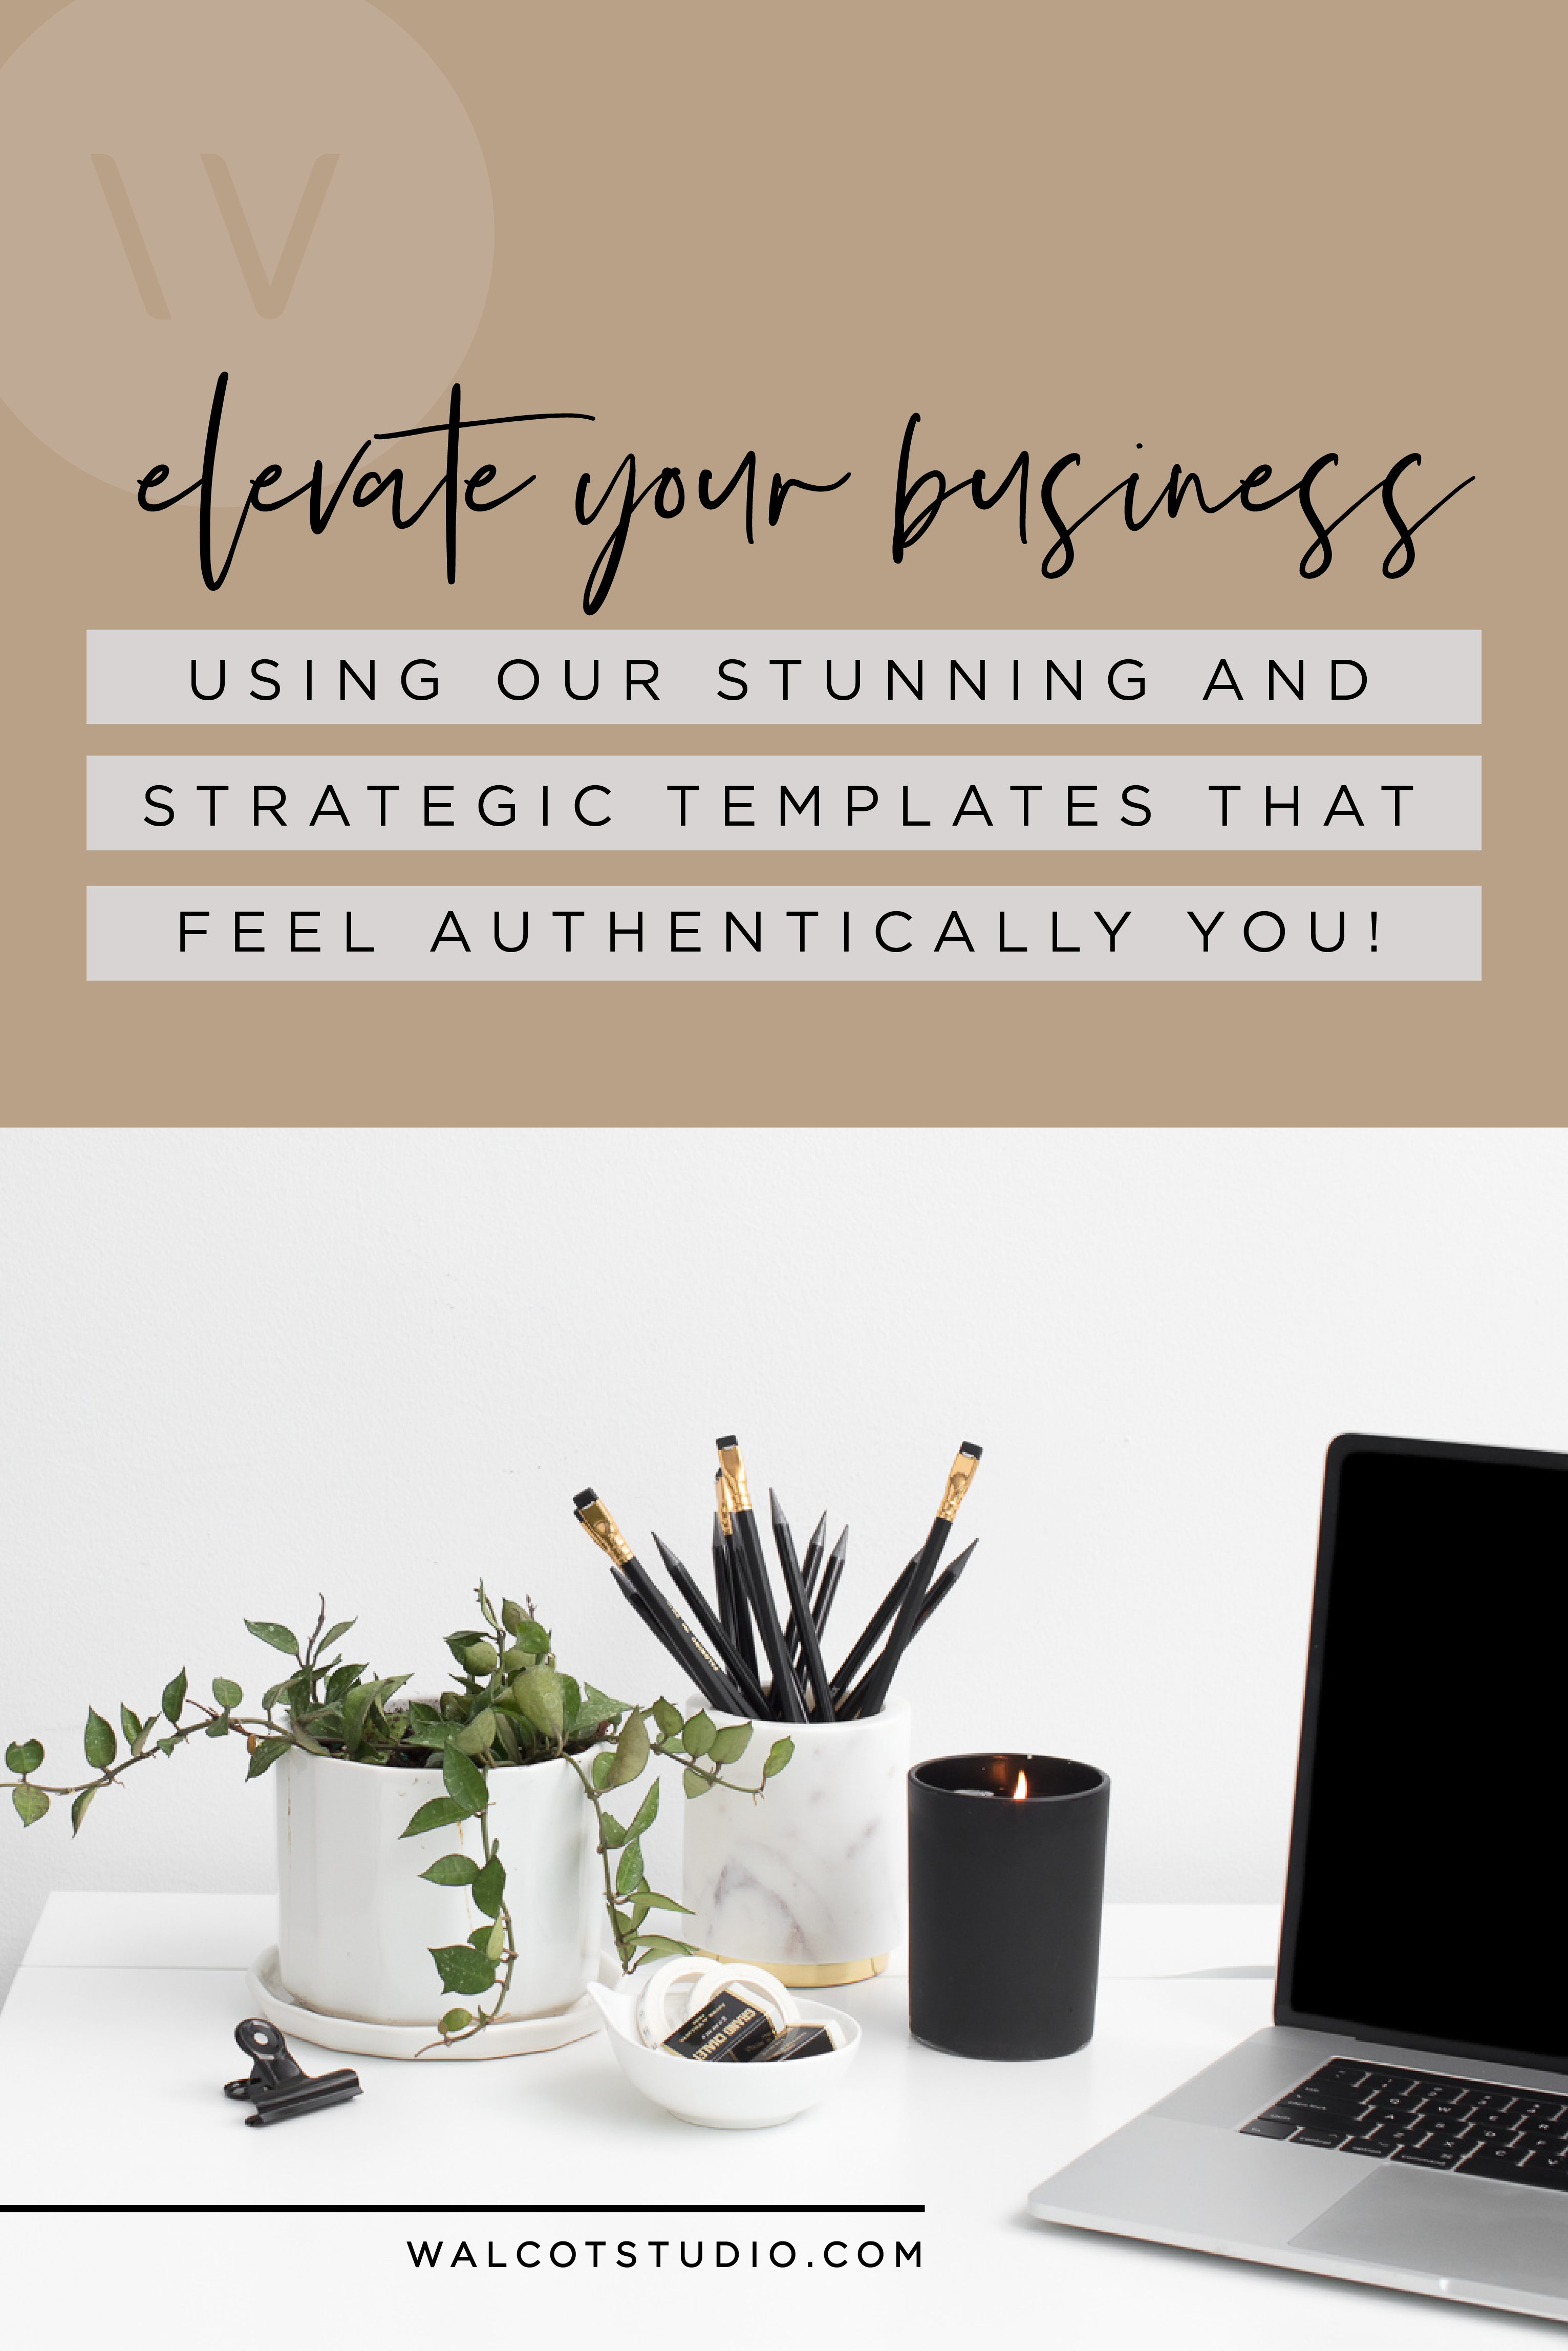 Elevate your business using our stunning and strategic templates that feel authentically you! by Walcot Studio